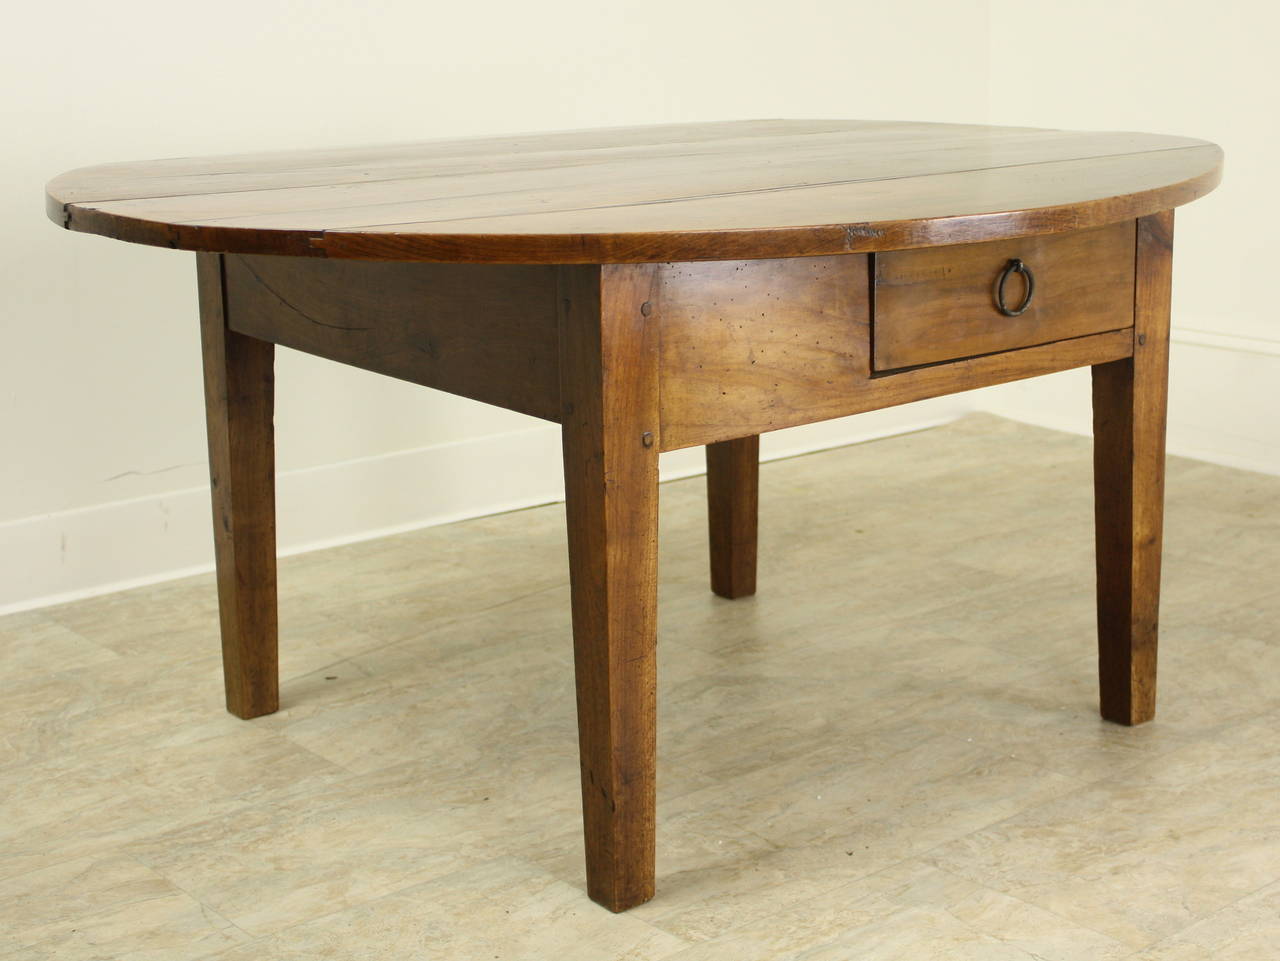 This coffee table has gorgeous cherry color and a charming oval design.  Classic tapered legs and one slightly offset drawer in the apron.  Some nice old distress in the top adds to the general character of the piece, although the highlight is truly